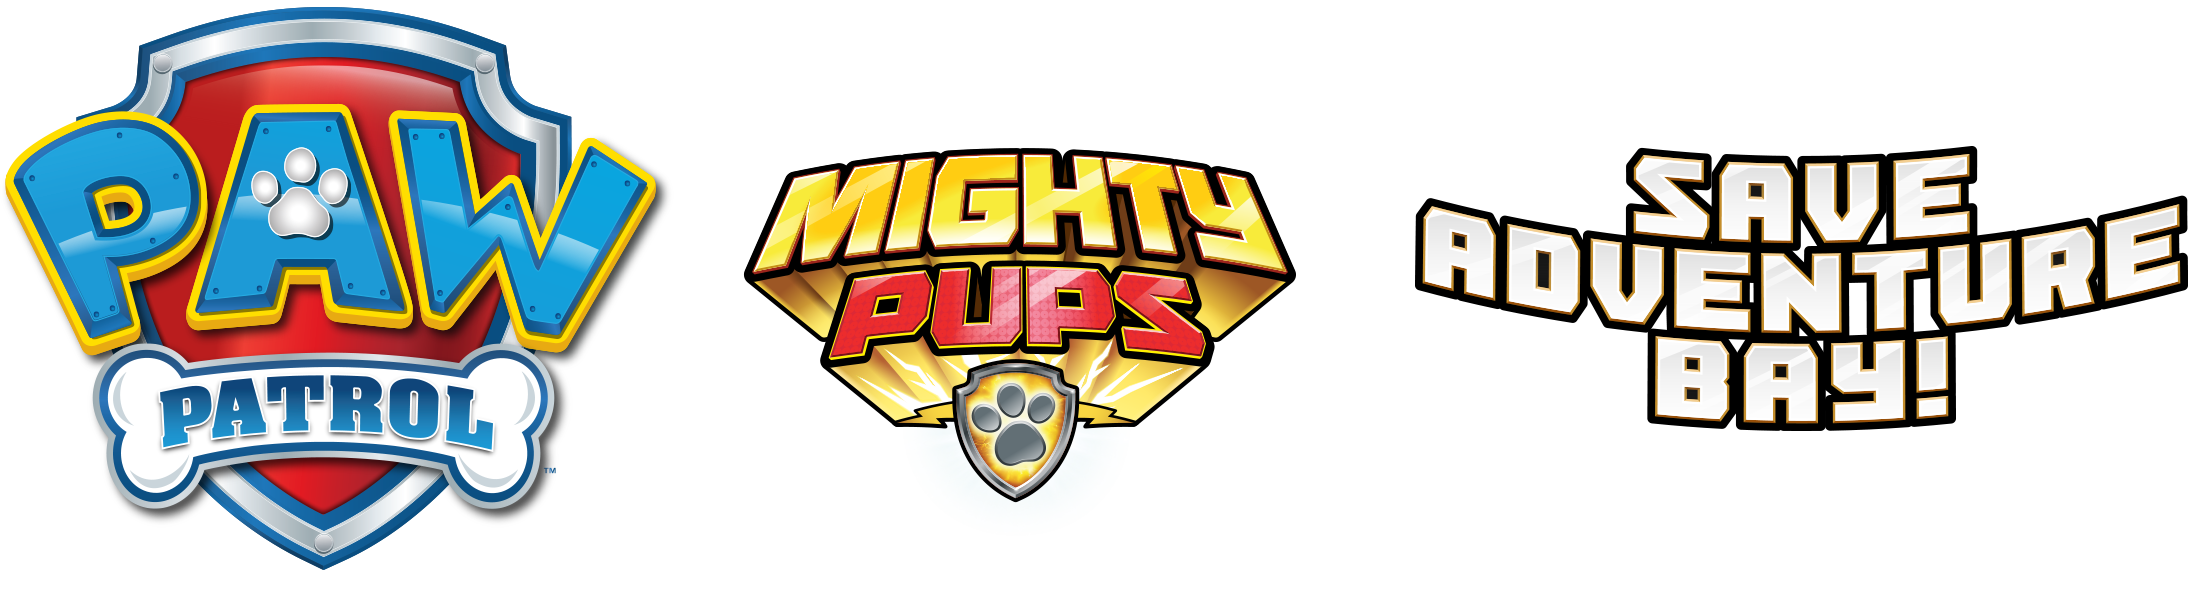 Paw Patrol Mighty Pups Save Adventure Bay - PS5,PS4 Games | PlayStation®  (US)